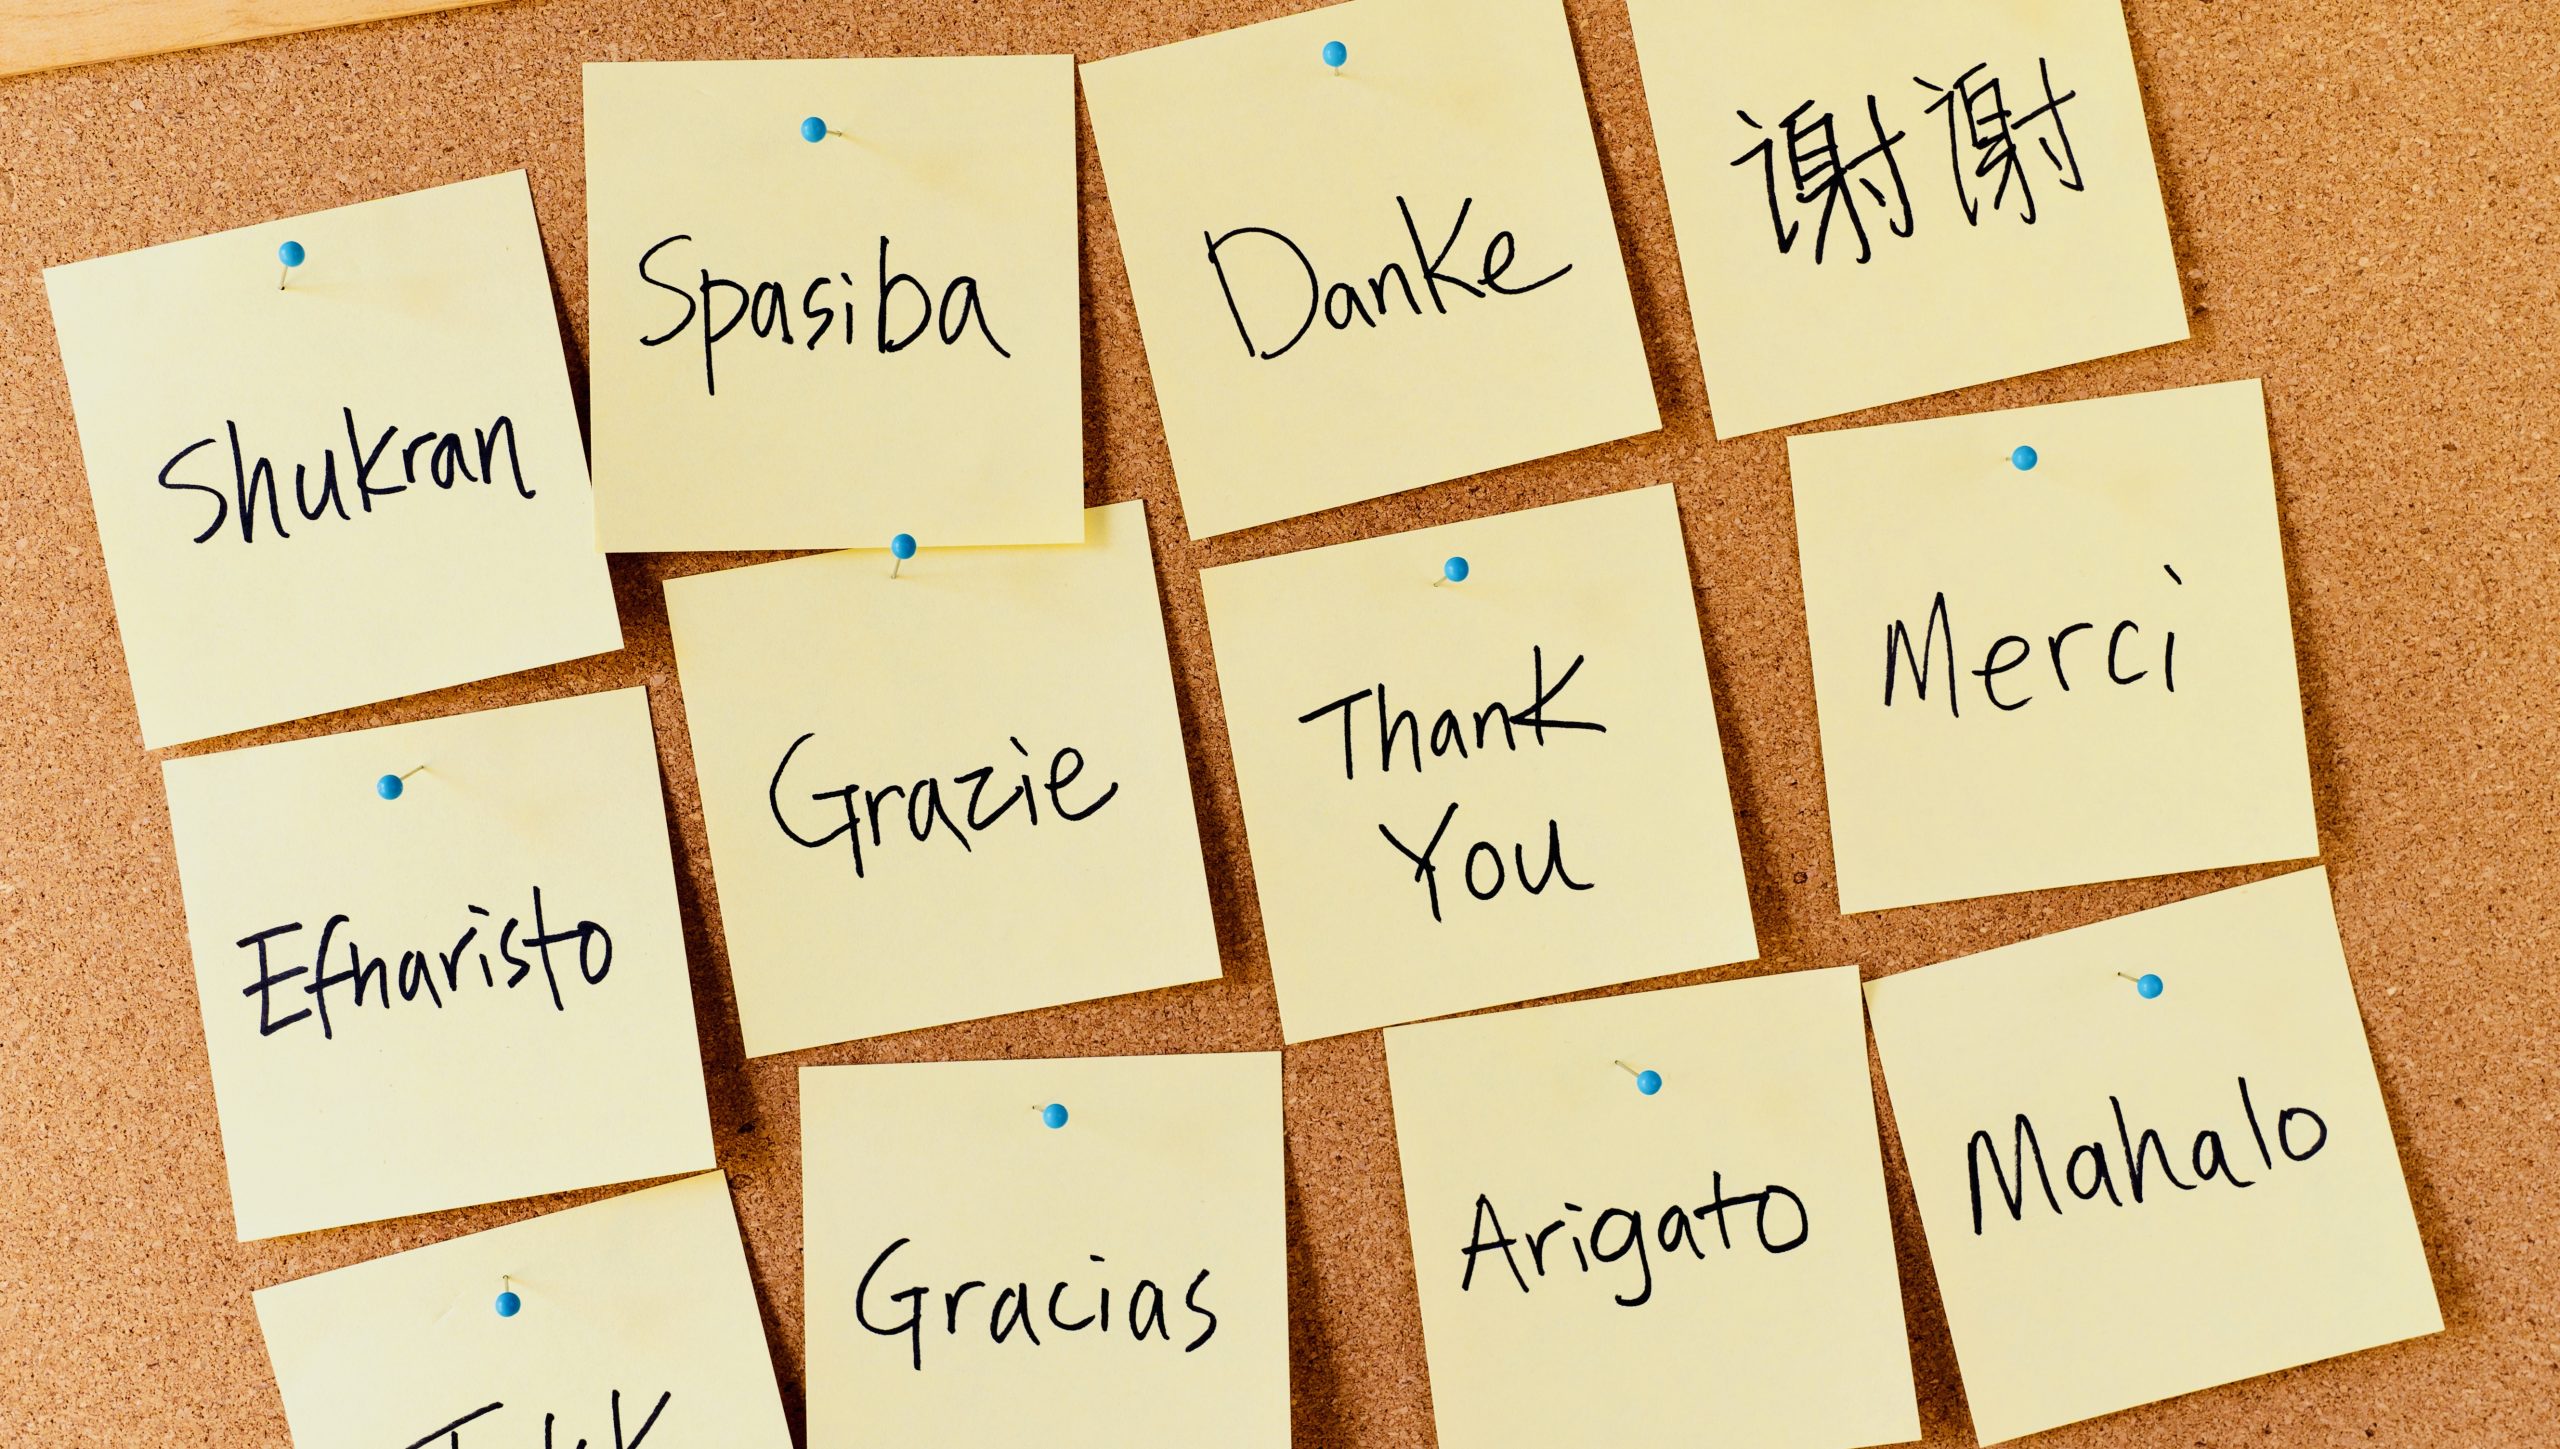 Post it notes of thank you in different languages